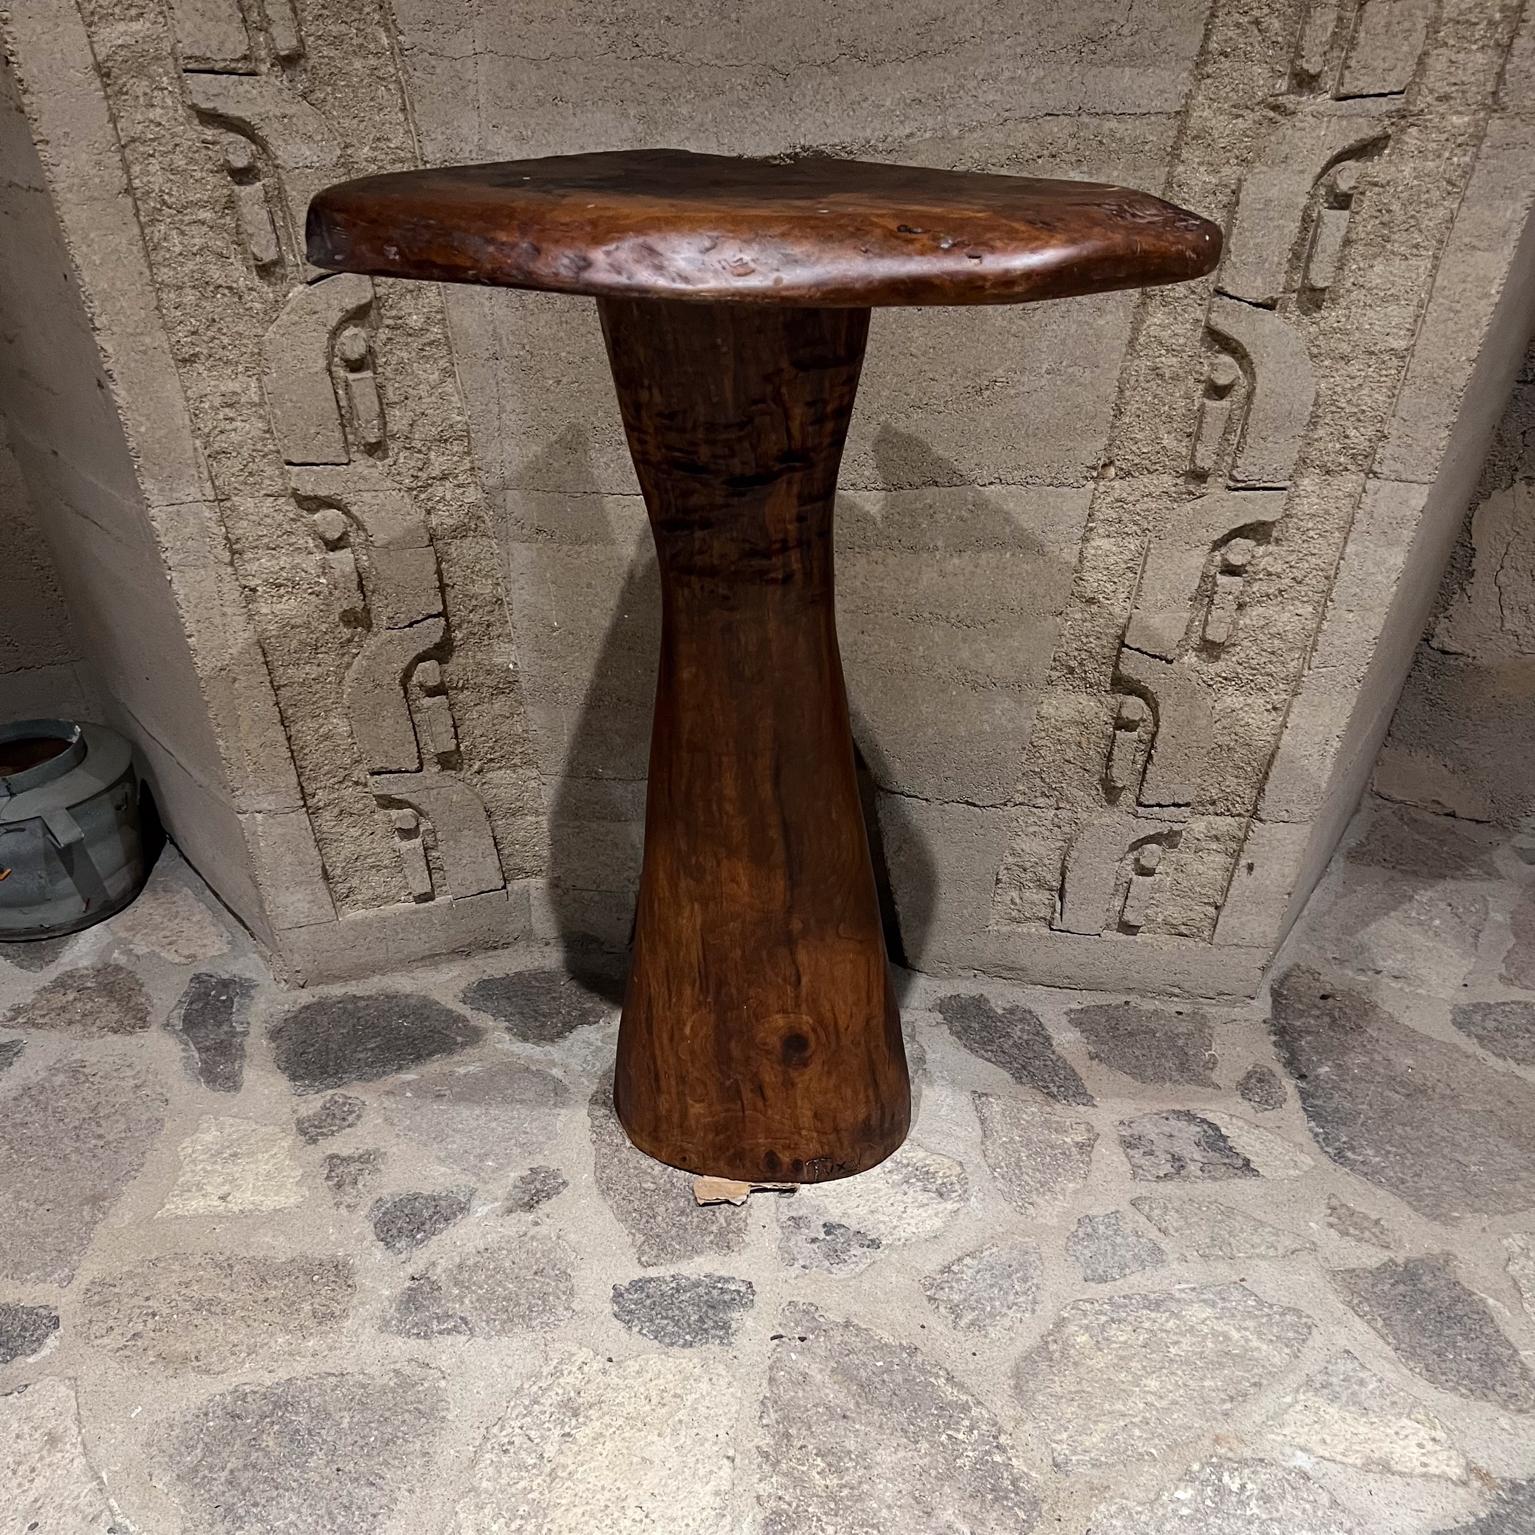 Organic Modern Pedestal Table 2013 Studio Design Solid Wood In Good Condition For Sale In Chula Vista, CA